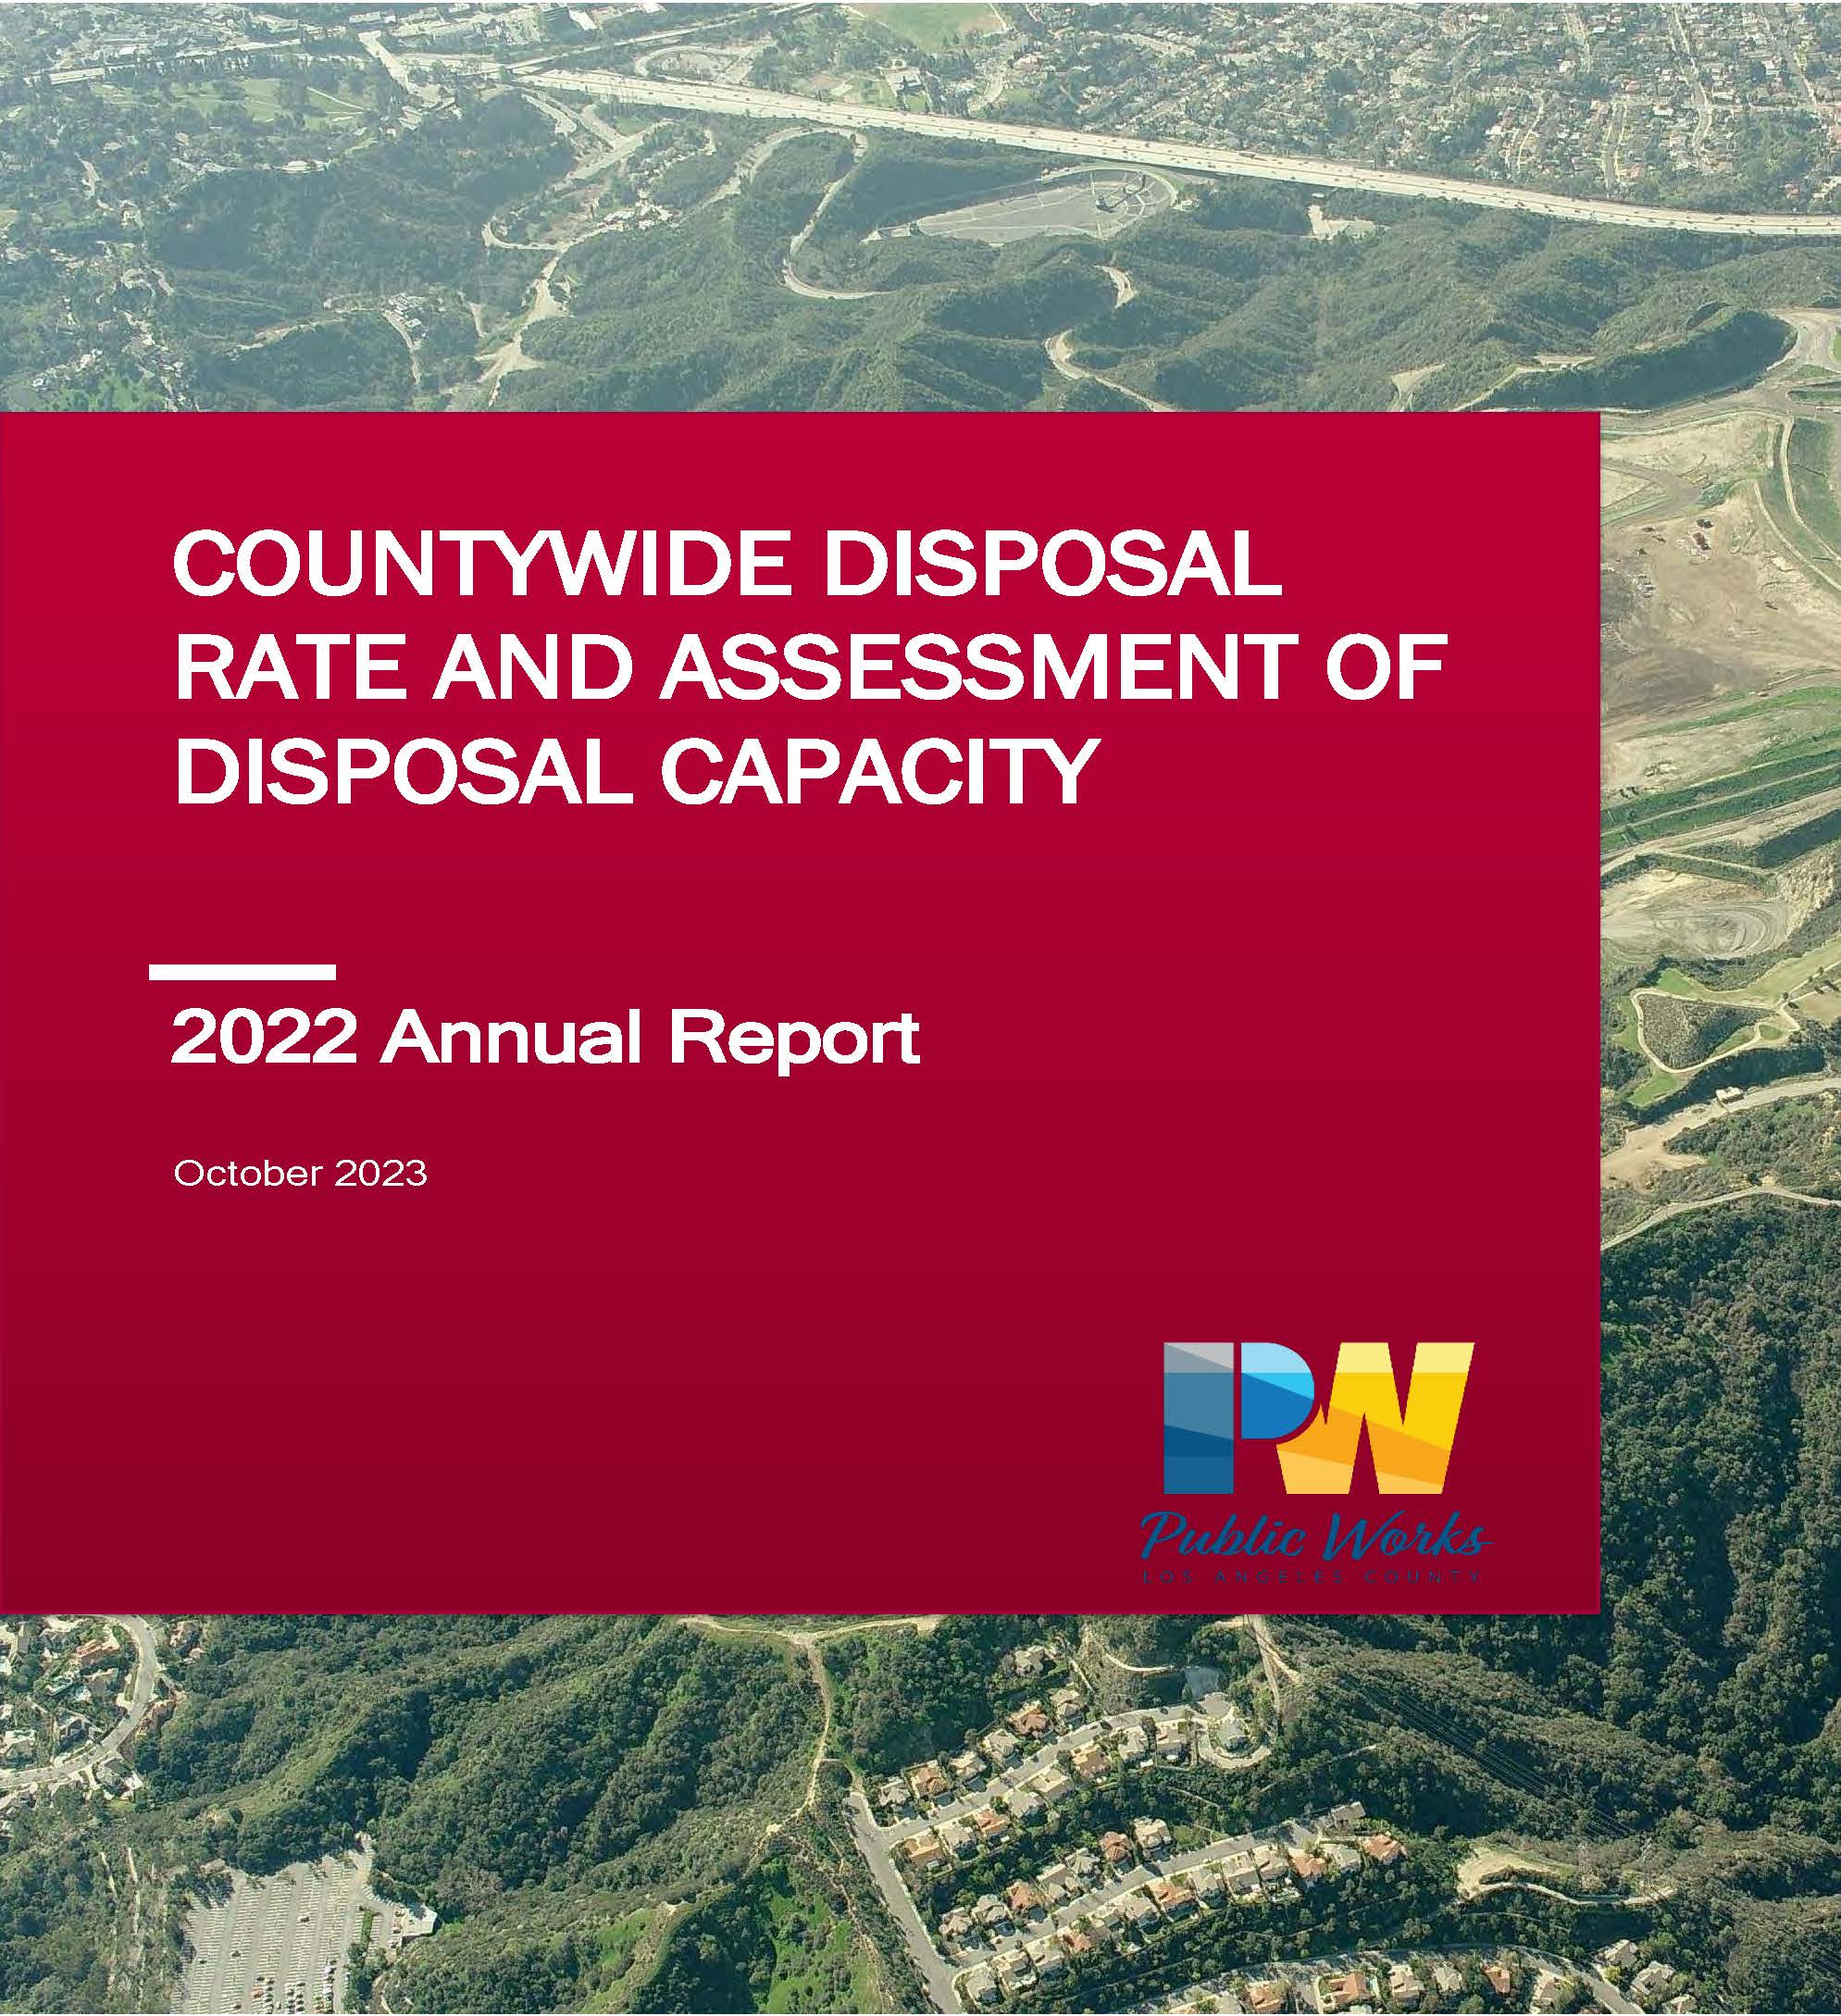 Countywide Disposal Rate and Assessment of Disposal Capacity, 2022 Report